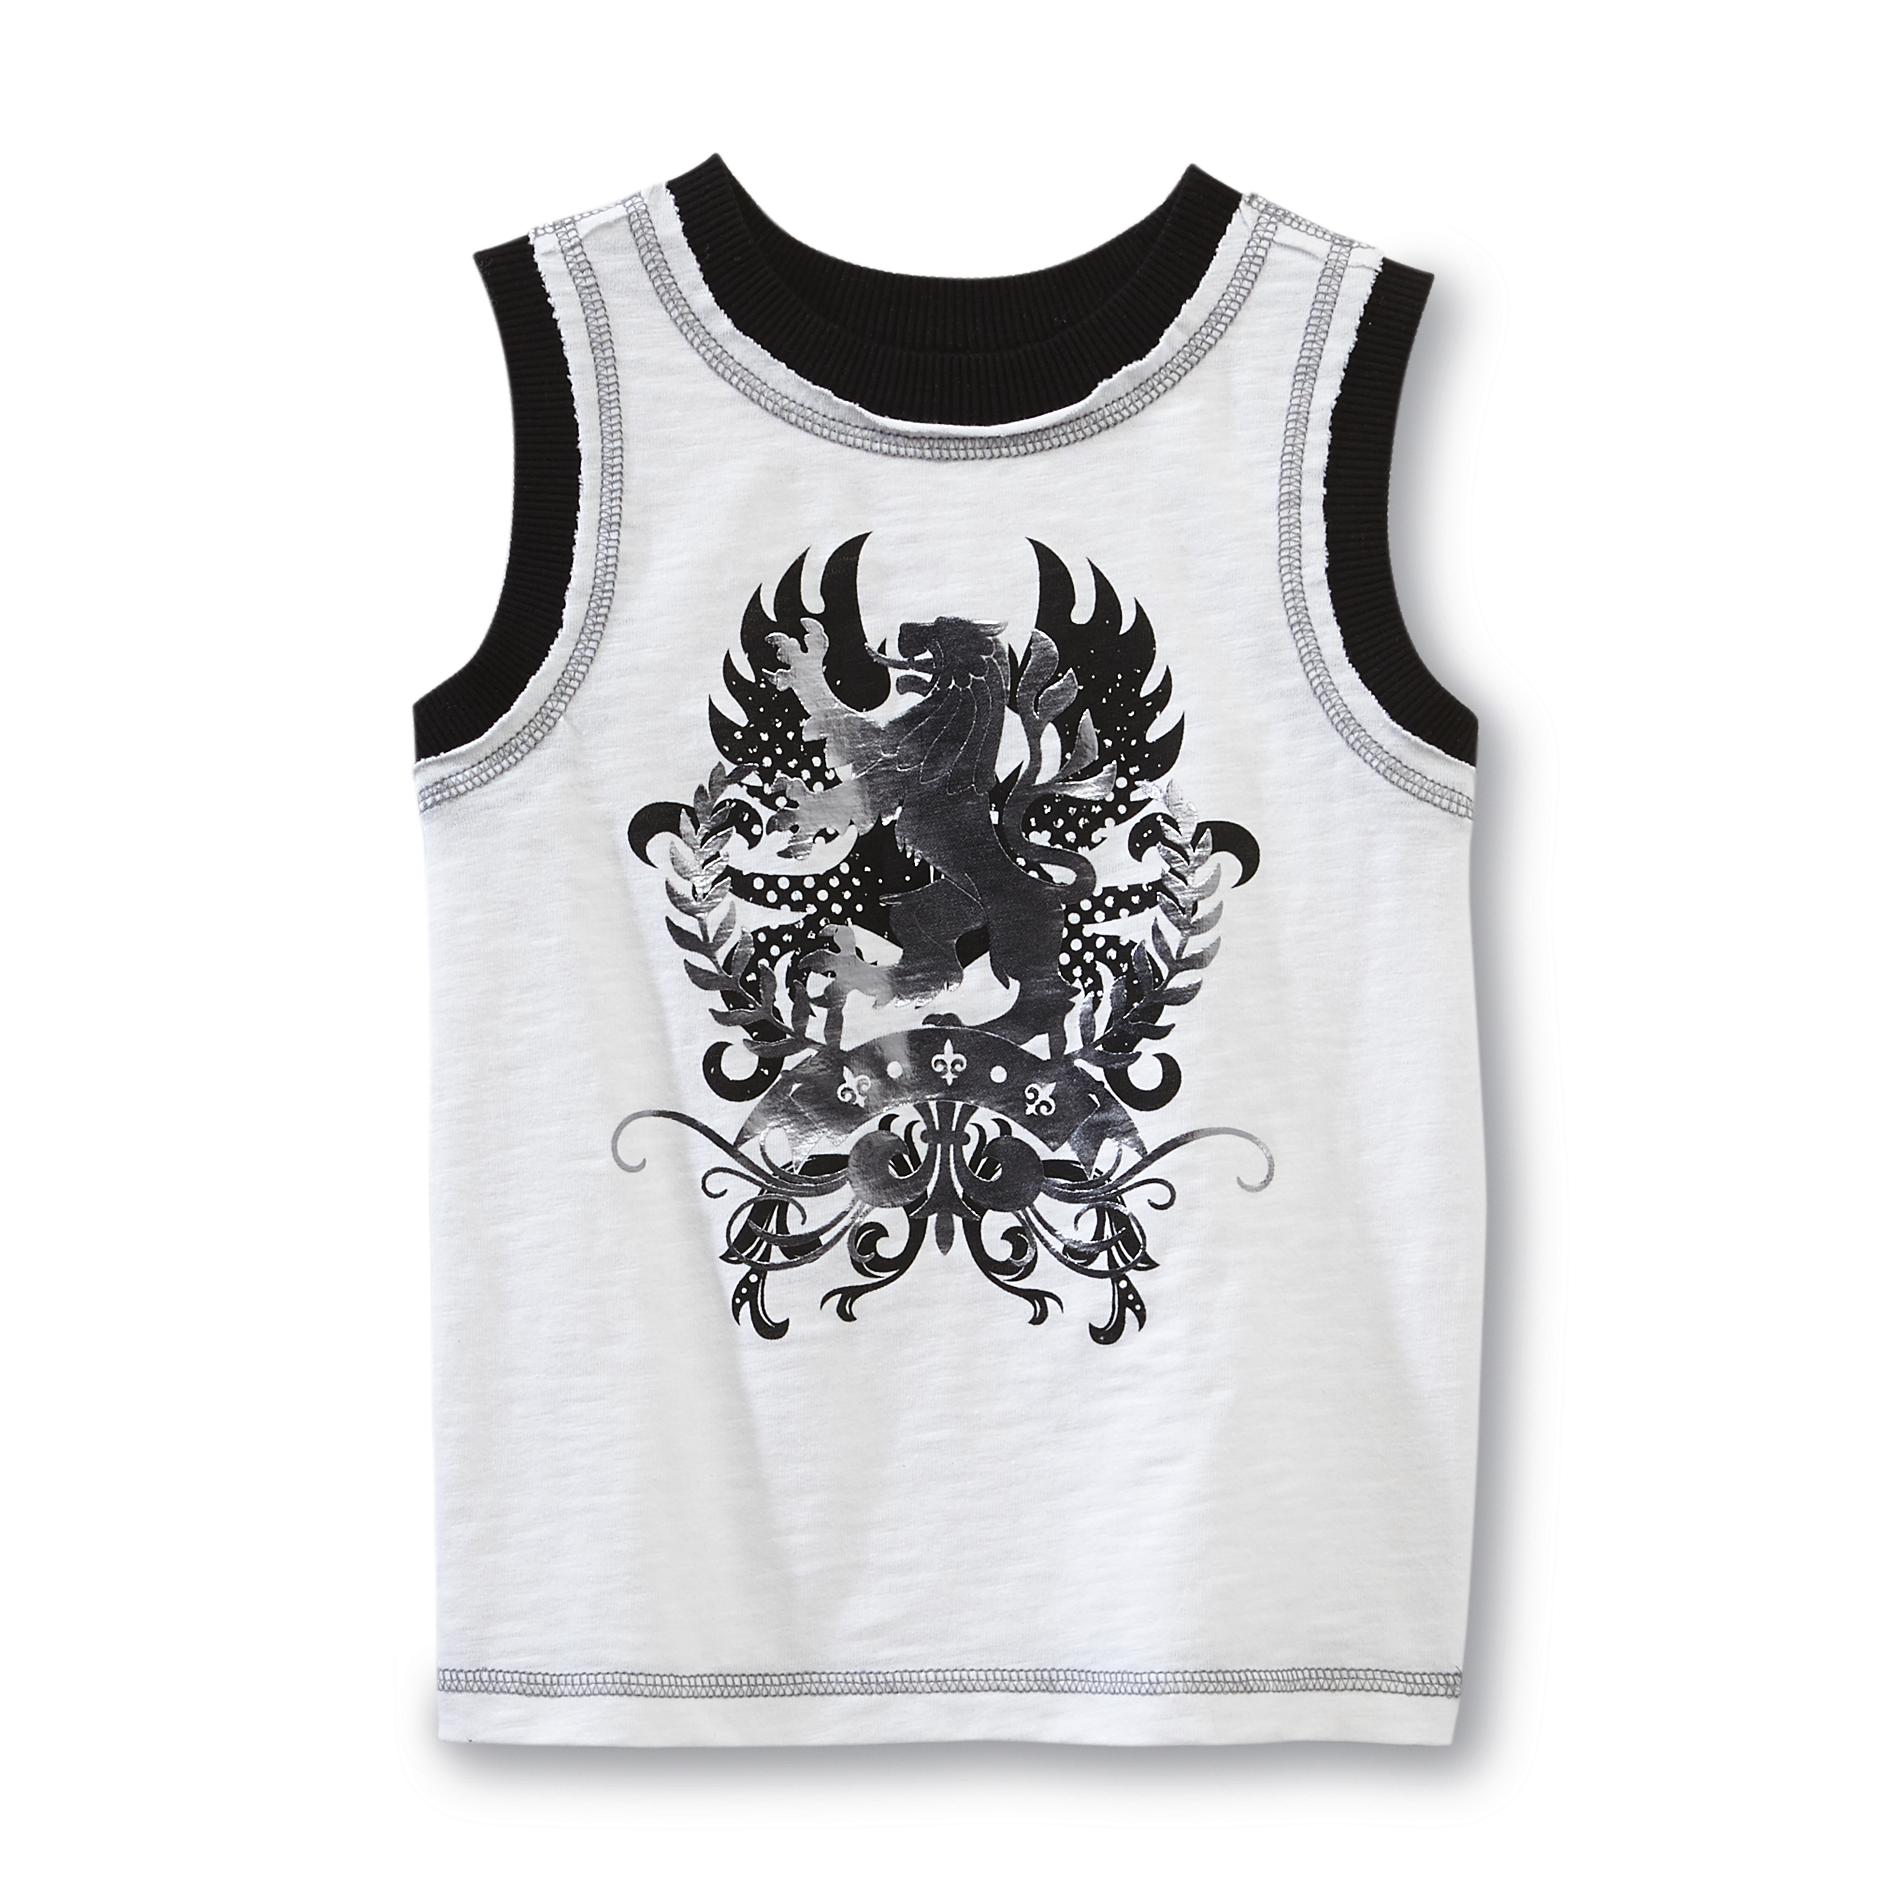 Sk2 Baby Toddler Boy's Graphic Muscle Tank - Lion